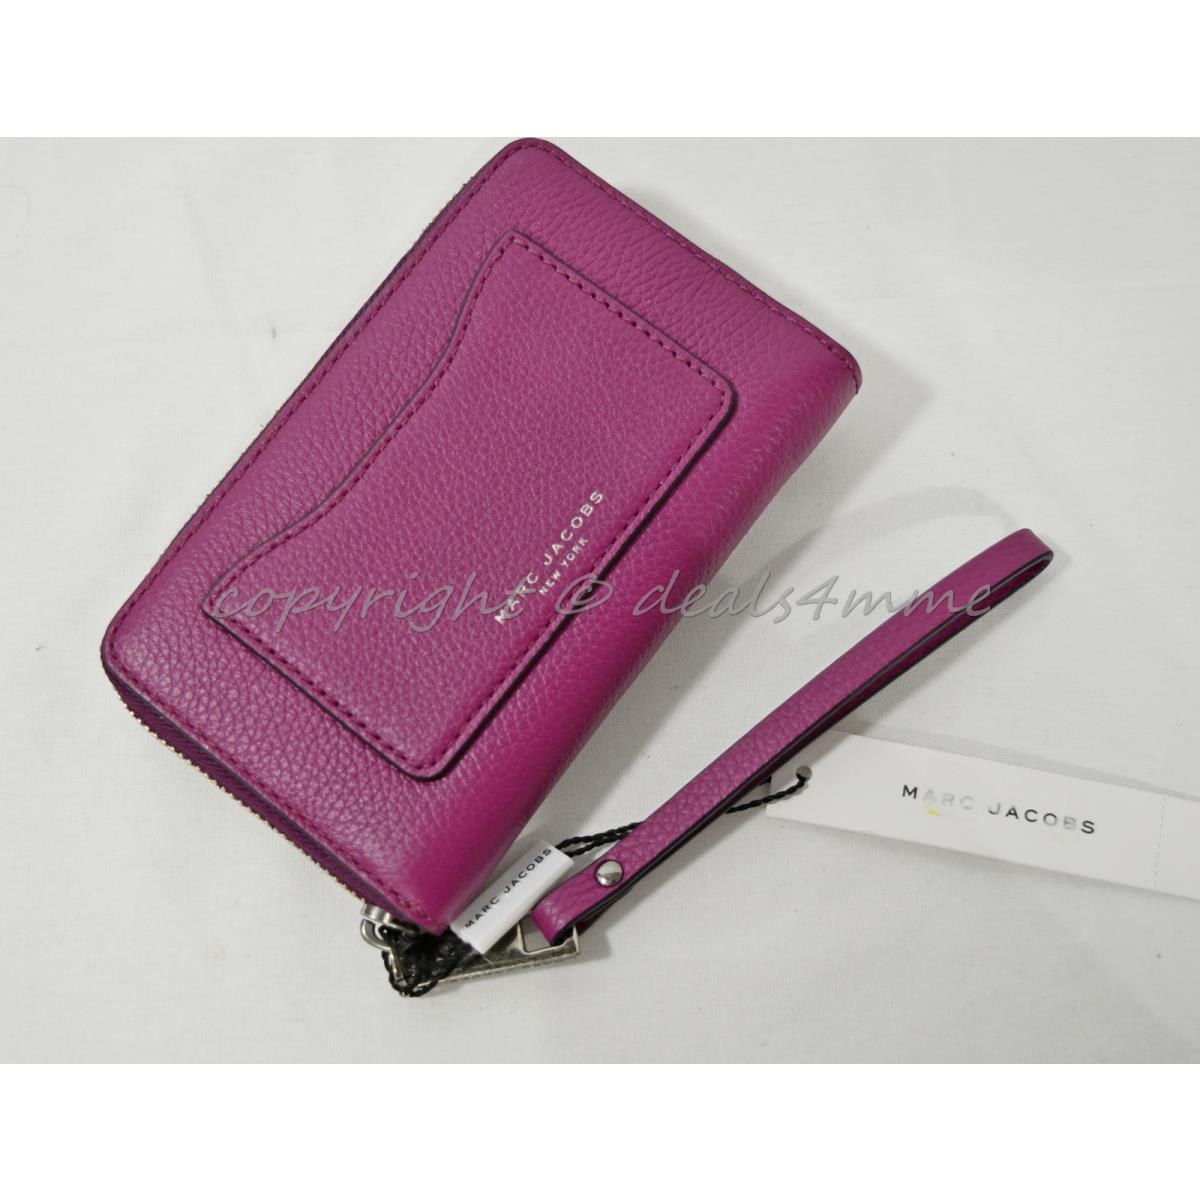 Marc By Marc Jacobs Recruit Small Bauletto Satchel Wallets in Wild Berry M0008173 Recruit Zip Phone Wristlet - Wild Berry